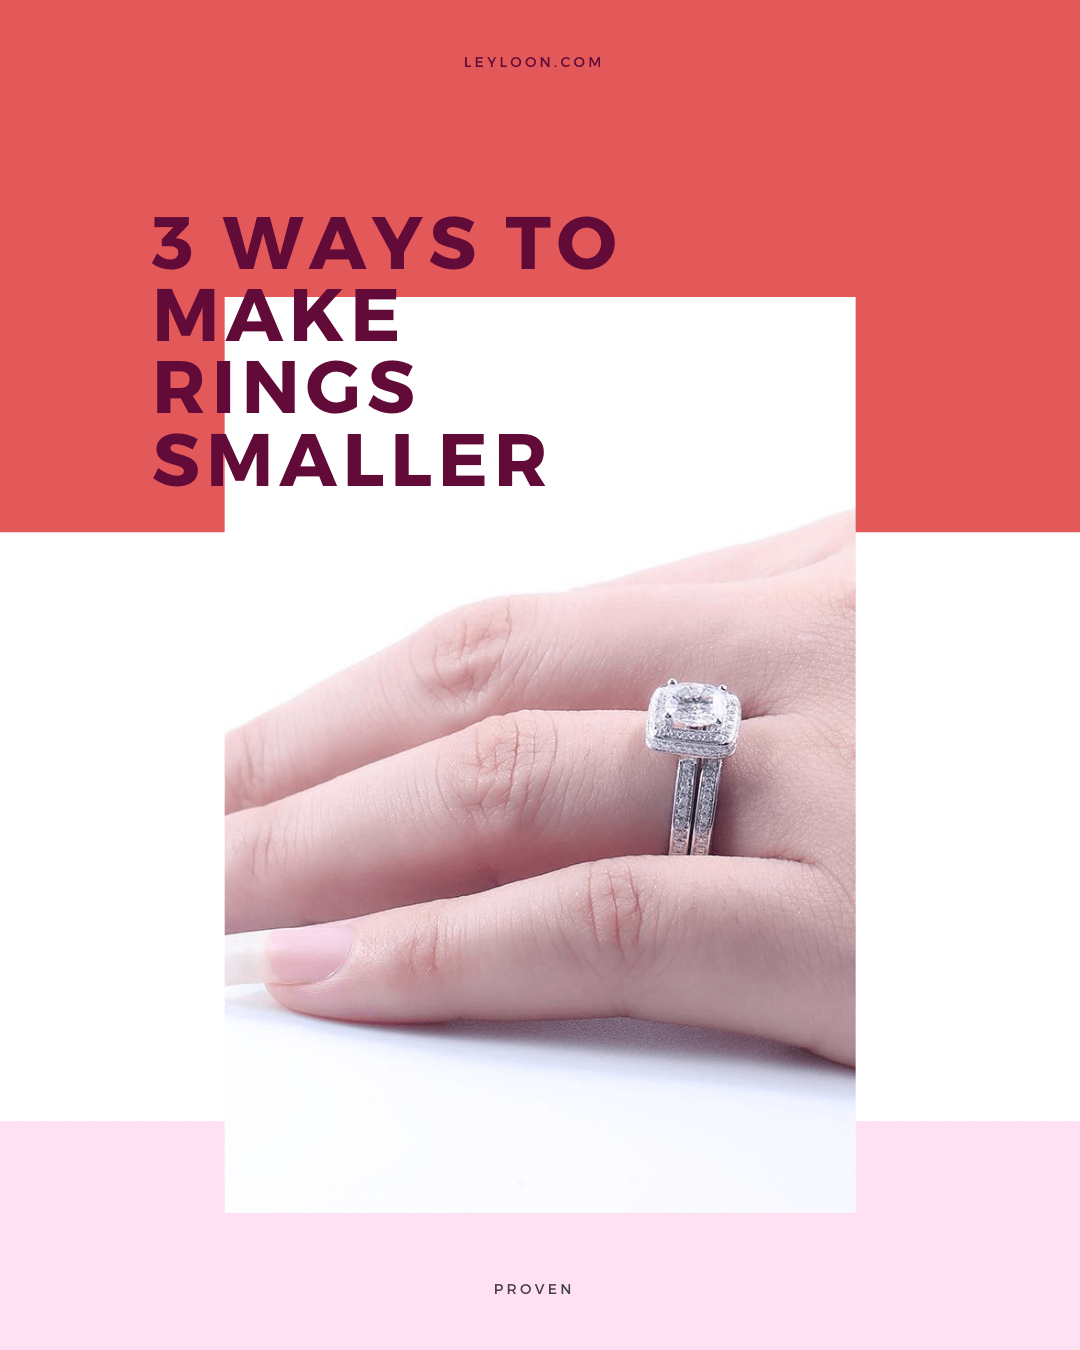 How to make your Ring Fit Tighter without Having it Re-Sized 